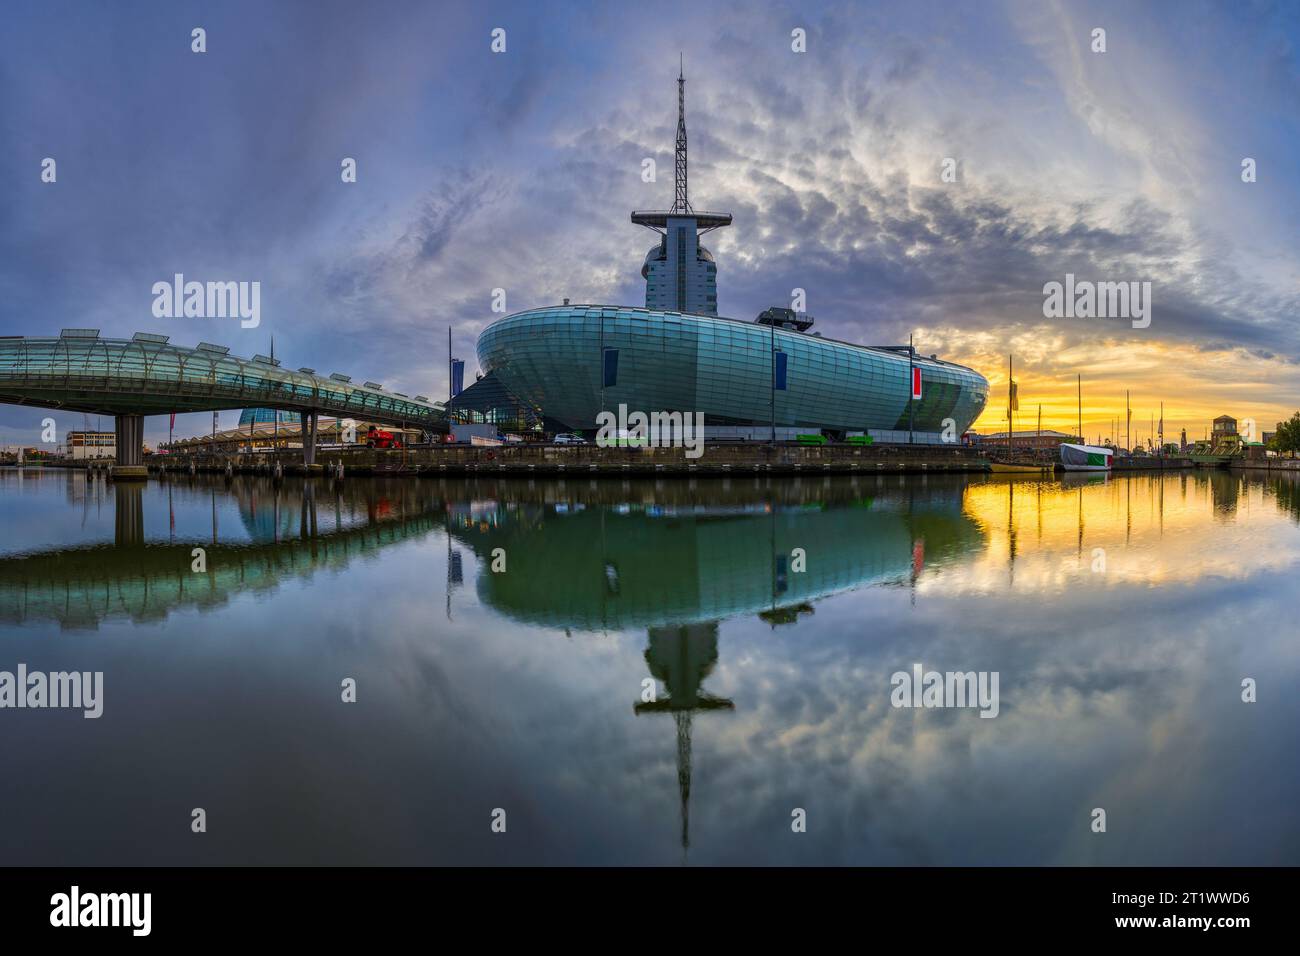 Klimahaus in Bremerhaven, Germany during sunset Stock Photo